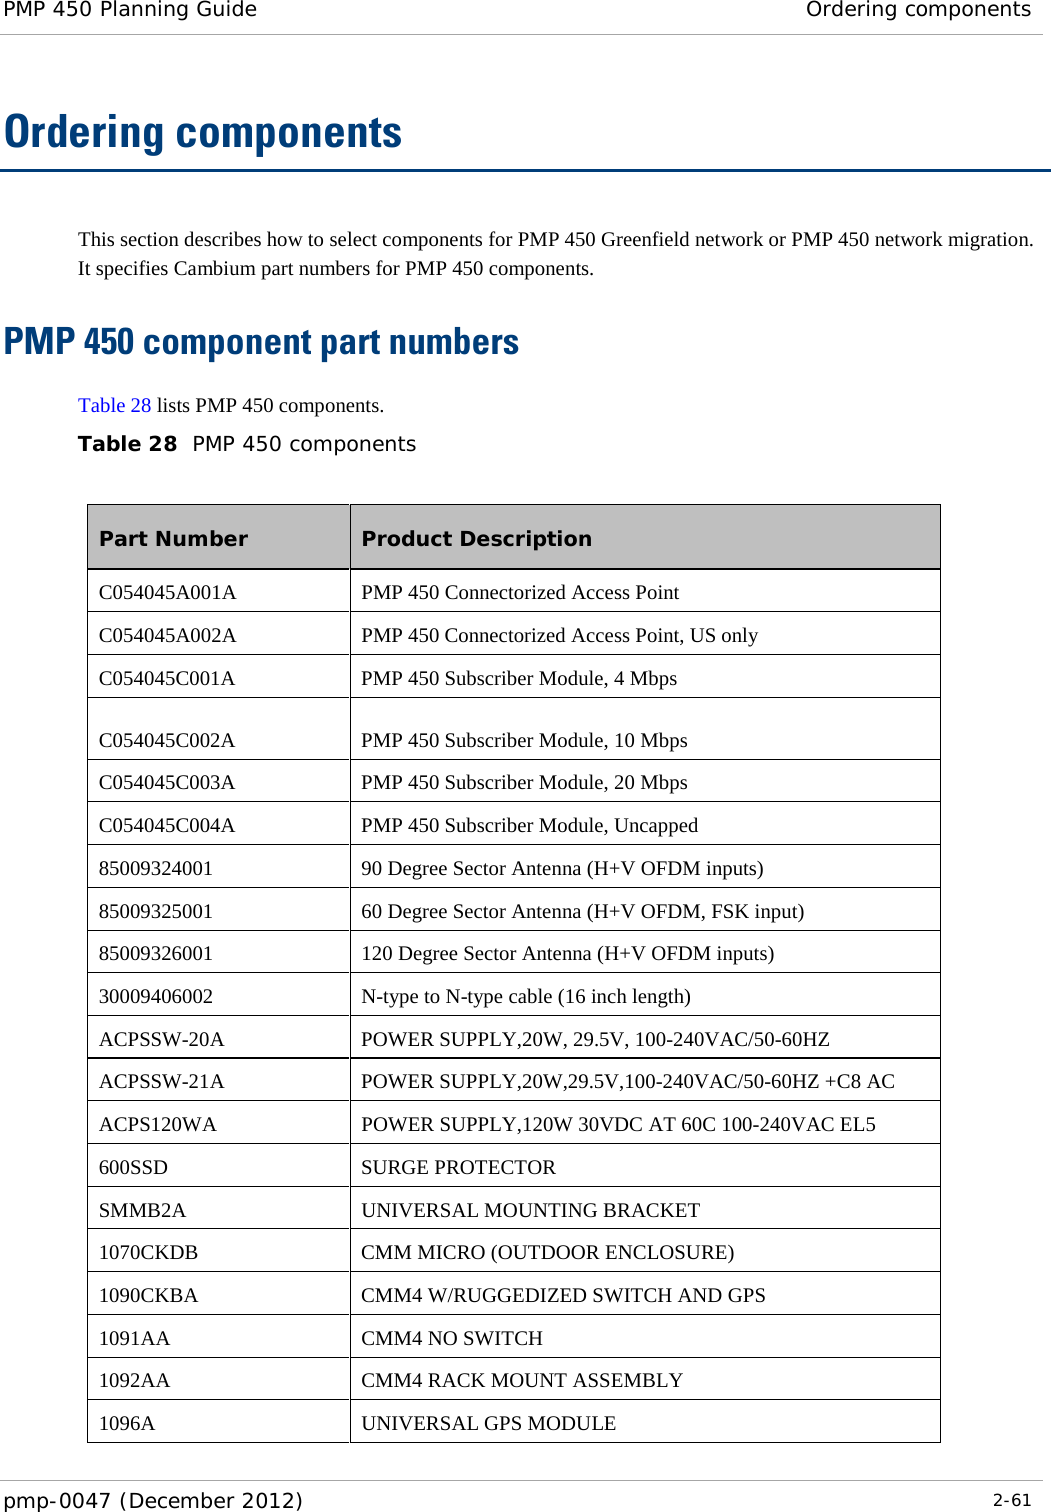 PMP 450 Planning Guide Ordering components  pmp-0047 (December 2012)  2-61  Ordering components This section describes how to select components for PMP 450 Greenfield network or PMP 450 network migration. It specifies Cambium part numbers for PMP 450 components. PMP 450 component part numbers Table 28 lists PMP 450 components. Table 28  PMP 450 components  Part Number Product Description C054045A001A PMP 450 Connectorized Access Point C054045A002A PMP 450 Connectorized Access Point, US only C054045C001A PMP 450 Subscriber Module, 4 Mbps C054045C002A PMP 450 Subscriber Module, 10 Mbps C054045C003A PMP 450 Subscriber Module, 20 Mbps C054045C004A PMP 450 Subscriber Module, Uncapped 85009324001 90 Degree Sector Antenna (H+V OFDM inputs) 85009325001 60 Degree Sector Antenna (H+V OFDM, FSK input) 85009326001 120 Degree Sector Antenna (H+V OFDM inputs) 30009406002  N-type to N-type cable (16 inch length) ACPSSW-20A POWER SUPPLY,20W, 29.5V, 100-240VAC/50-60HZ ACPSSW-21A POWER SUPPLY,20W,29.5V,100-240VAC/50-60HZ +C8 AC ACPS120WA POWER SUPPLY,120W 30VDC AT 60C 100-240VAC EL5 600SSD SURGE PROTECTOR SMMB2A UNIVERSAL MOUNTING BRACKET 1070CKDB CMM MICRO (OUTDOOR ENCLOSURE) 1090CKBA CMM4 W/RUGGEDIZED SWITCH AND GPS 1091AA CMM4 NO SWITCH 1092AA CMM4 RACK MOUNT ASSEMBLY 1096A UNIVERSAL GPS MODULE 